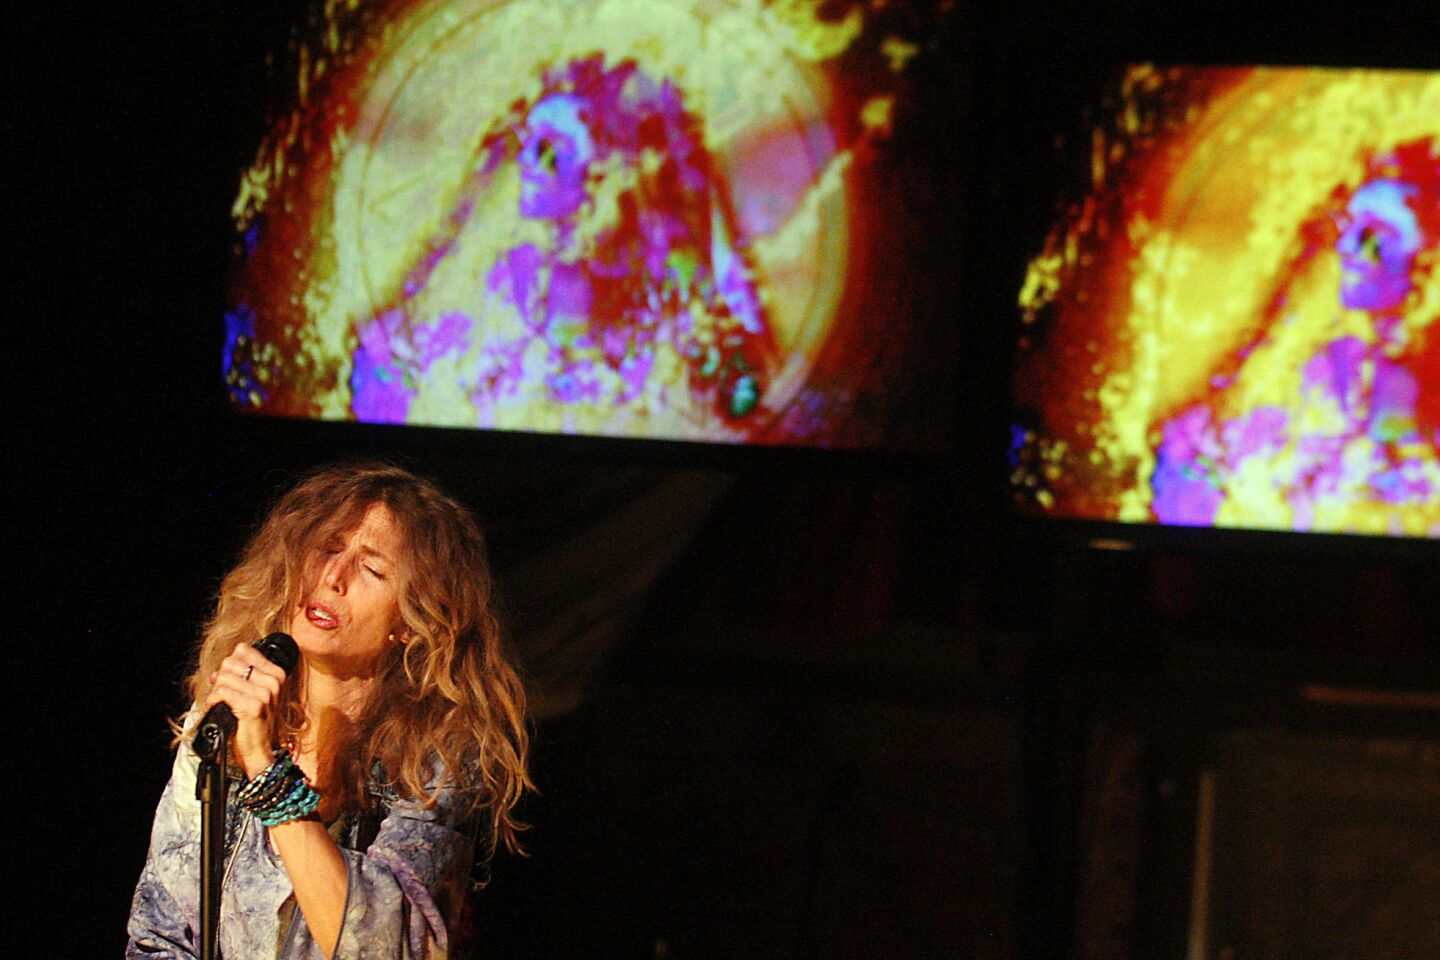 Arts and culture in pictures by The Times | Sophie B. Hawkins as Janis Joplin